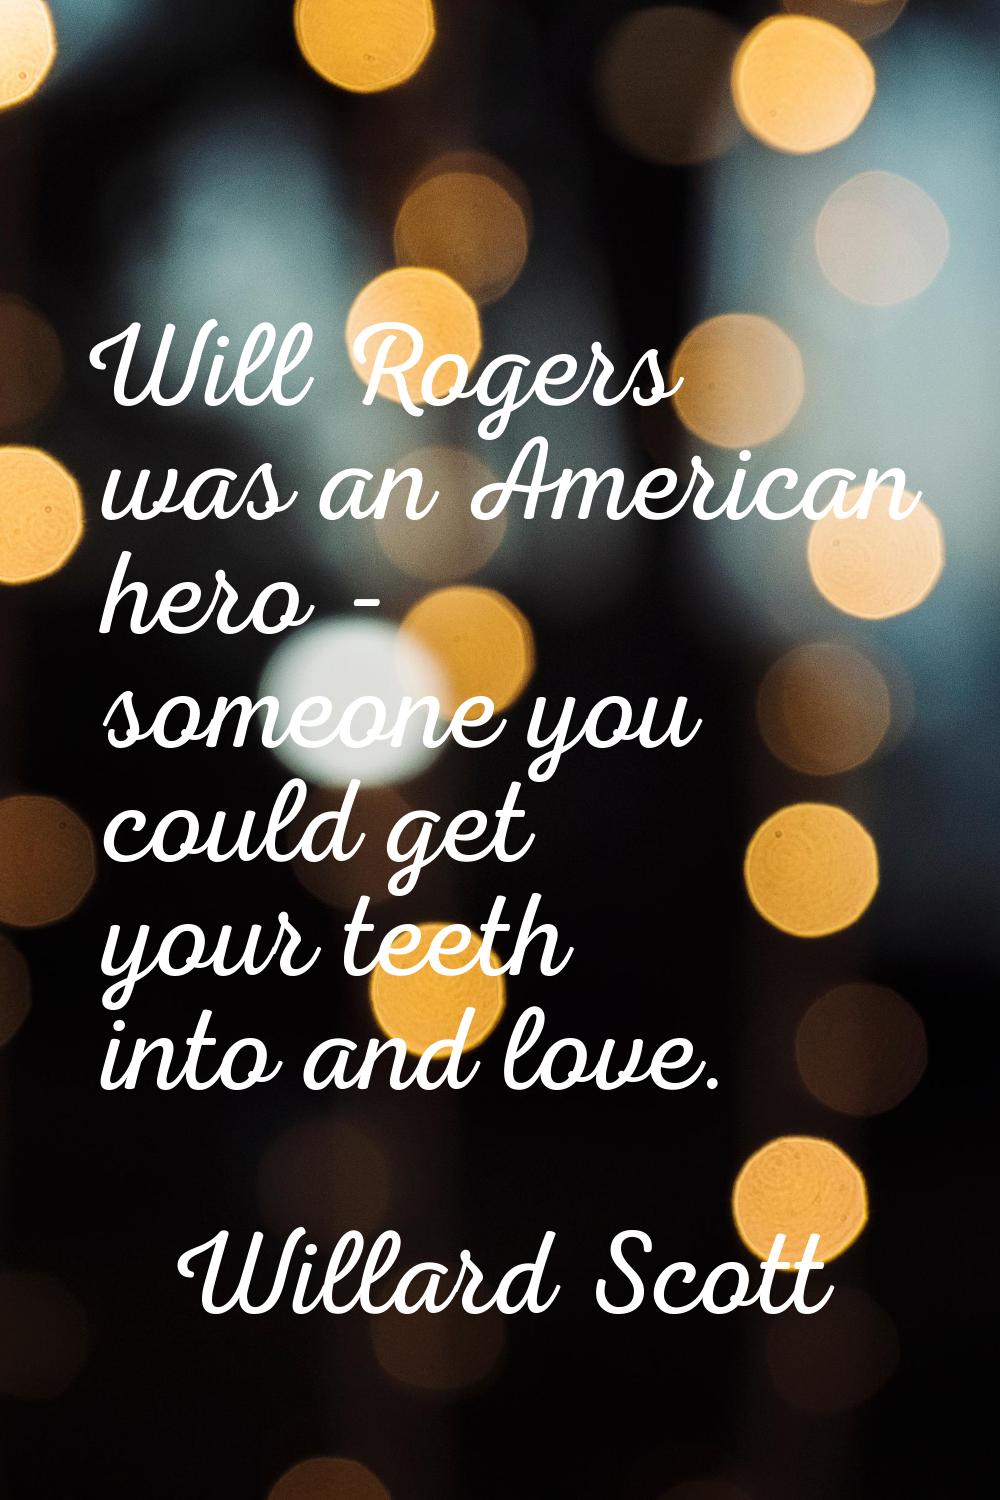 Will Rogers was an American hero - someone you could get your teeth into and love.